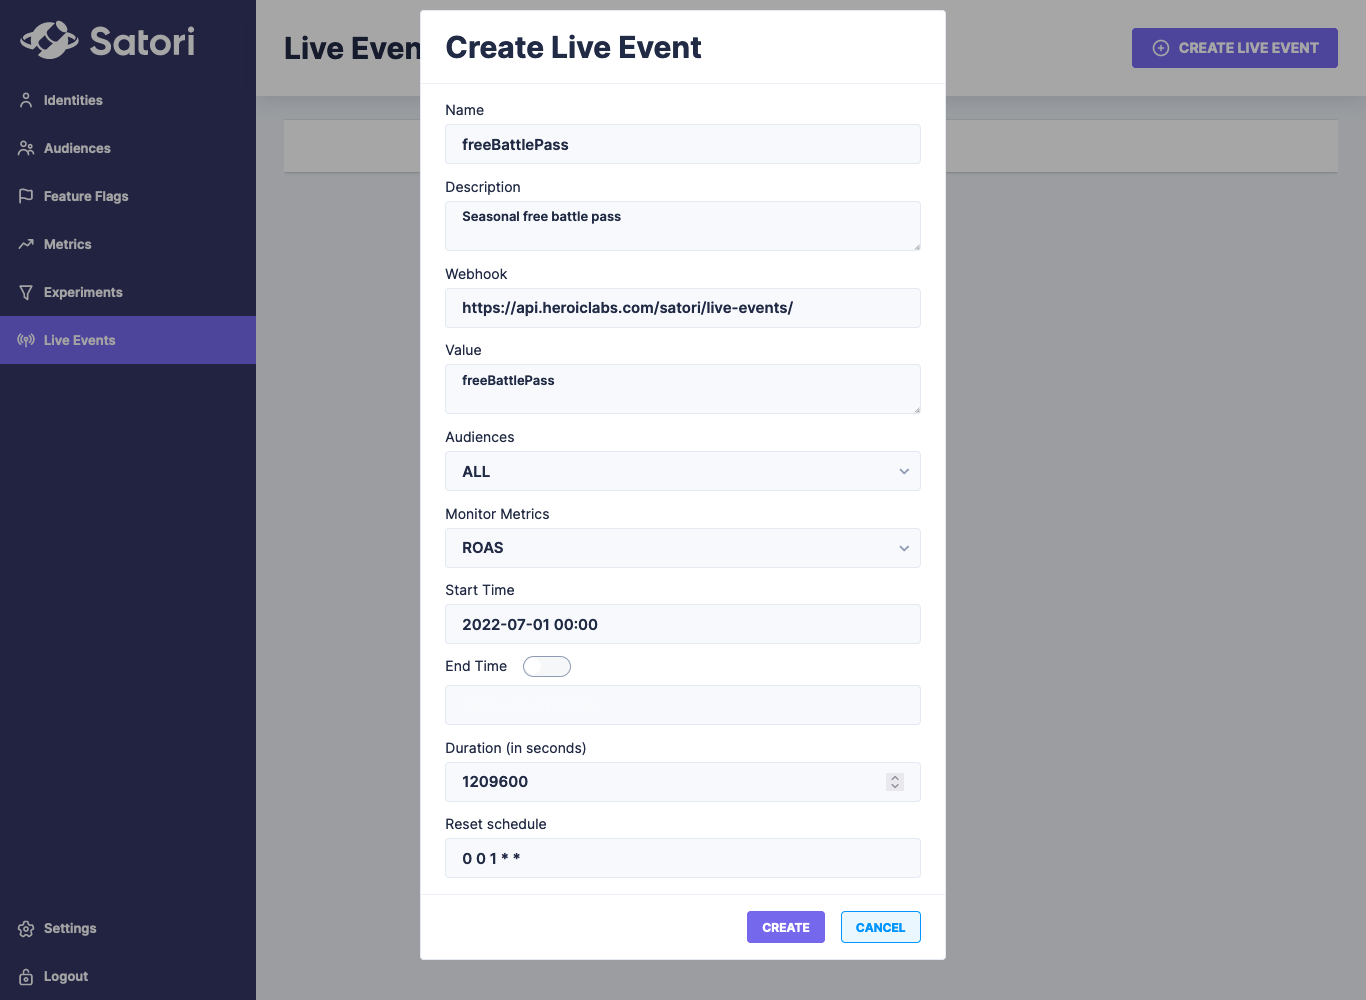 Creating Live Events